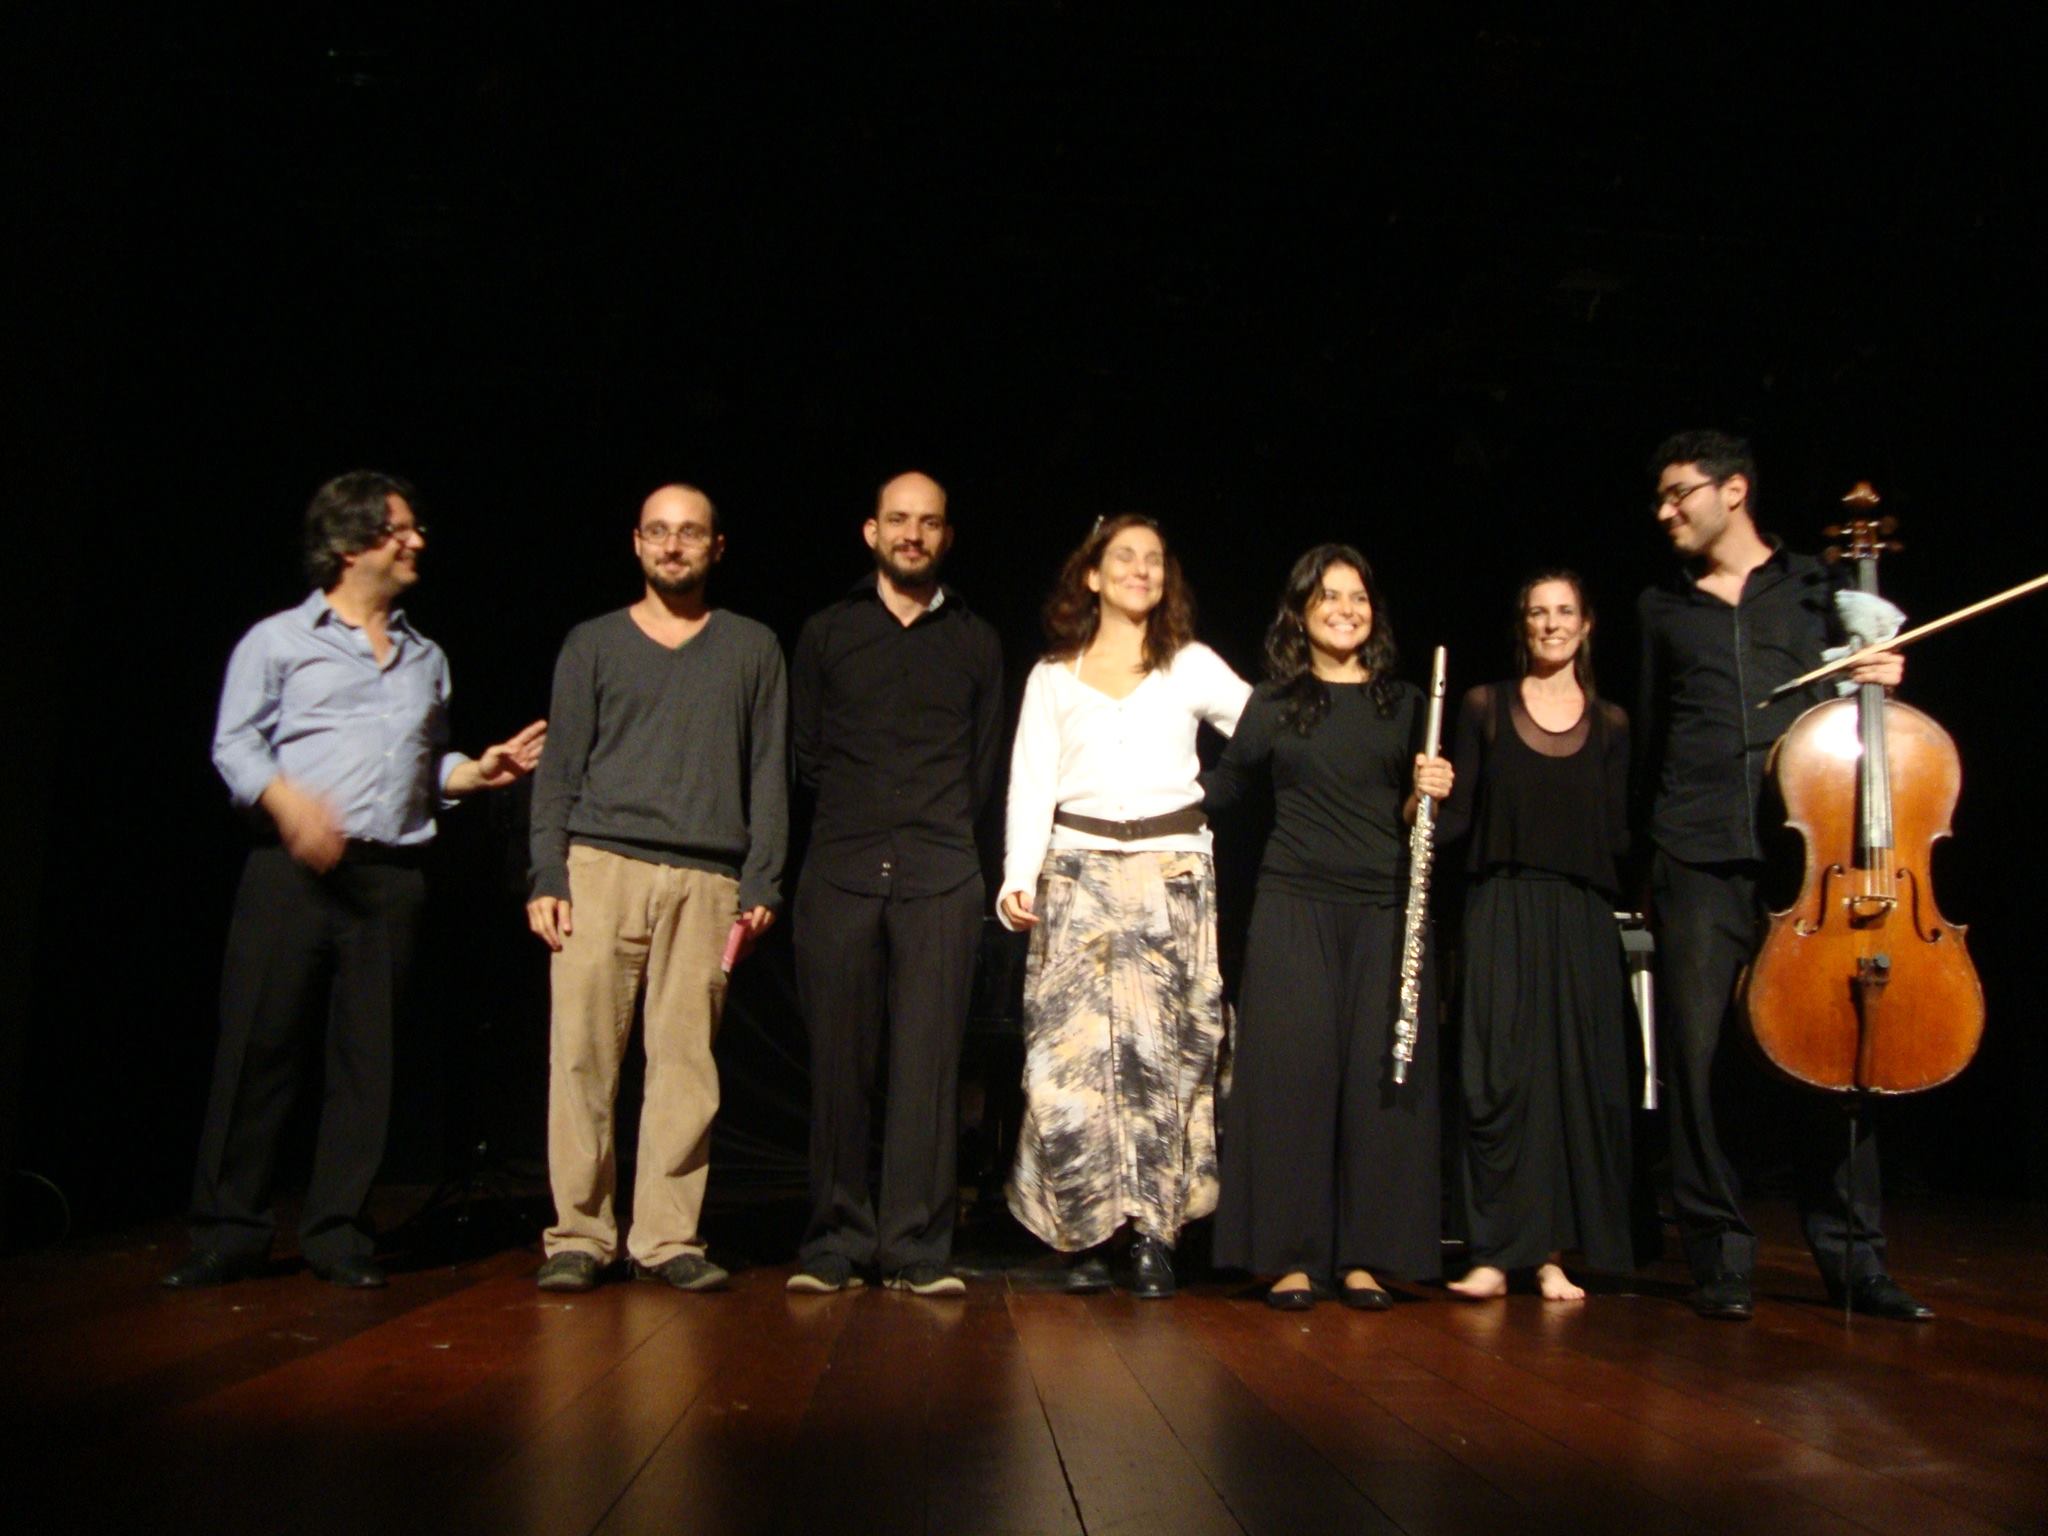 Sergio with Geisa Felipe and others